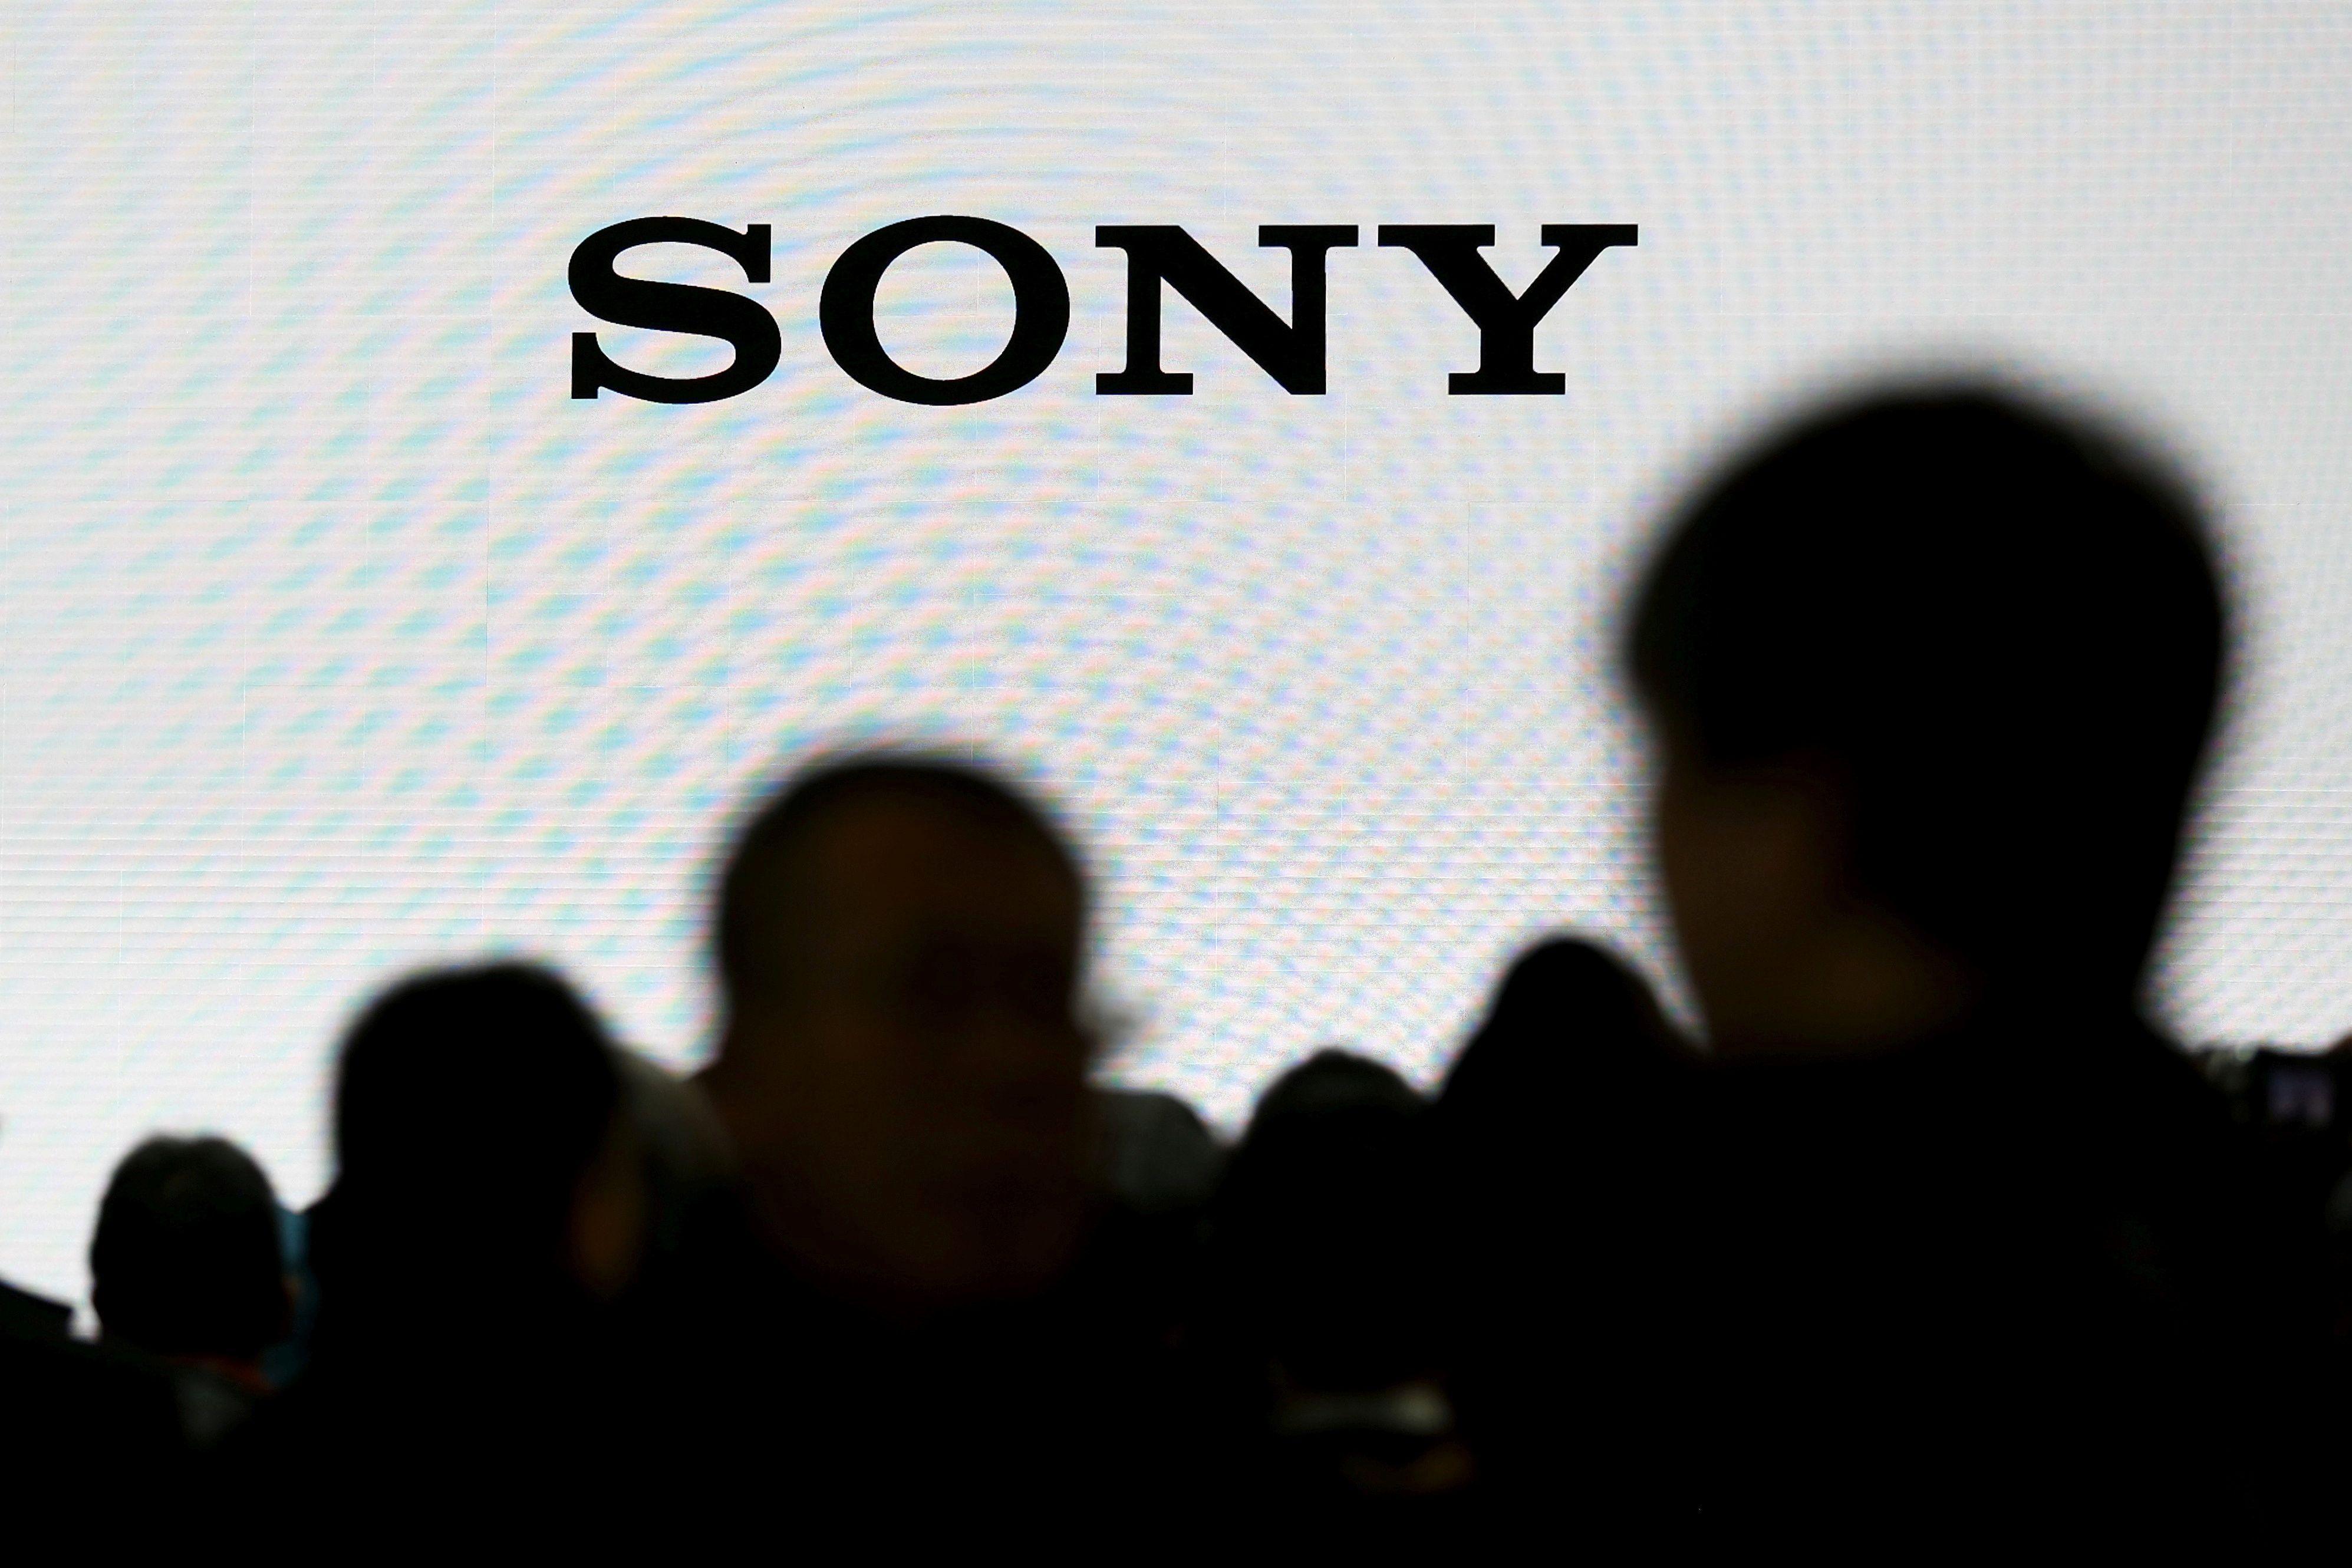 Sony Phone Logo - MWC 2017: Sony Beats Apple, Samsung in Fastest Smartphone Race | Fortune